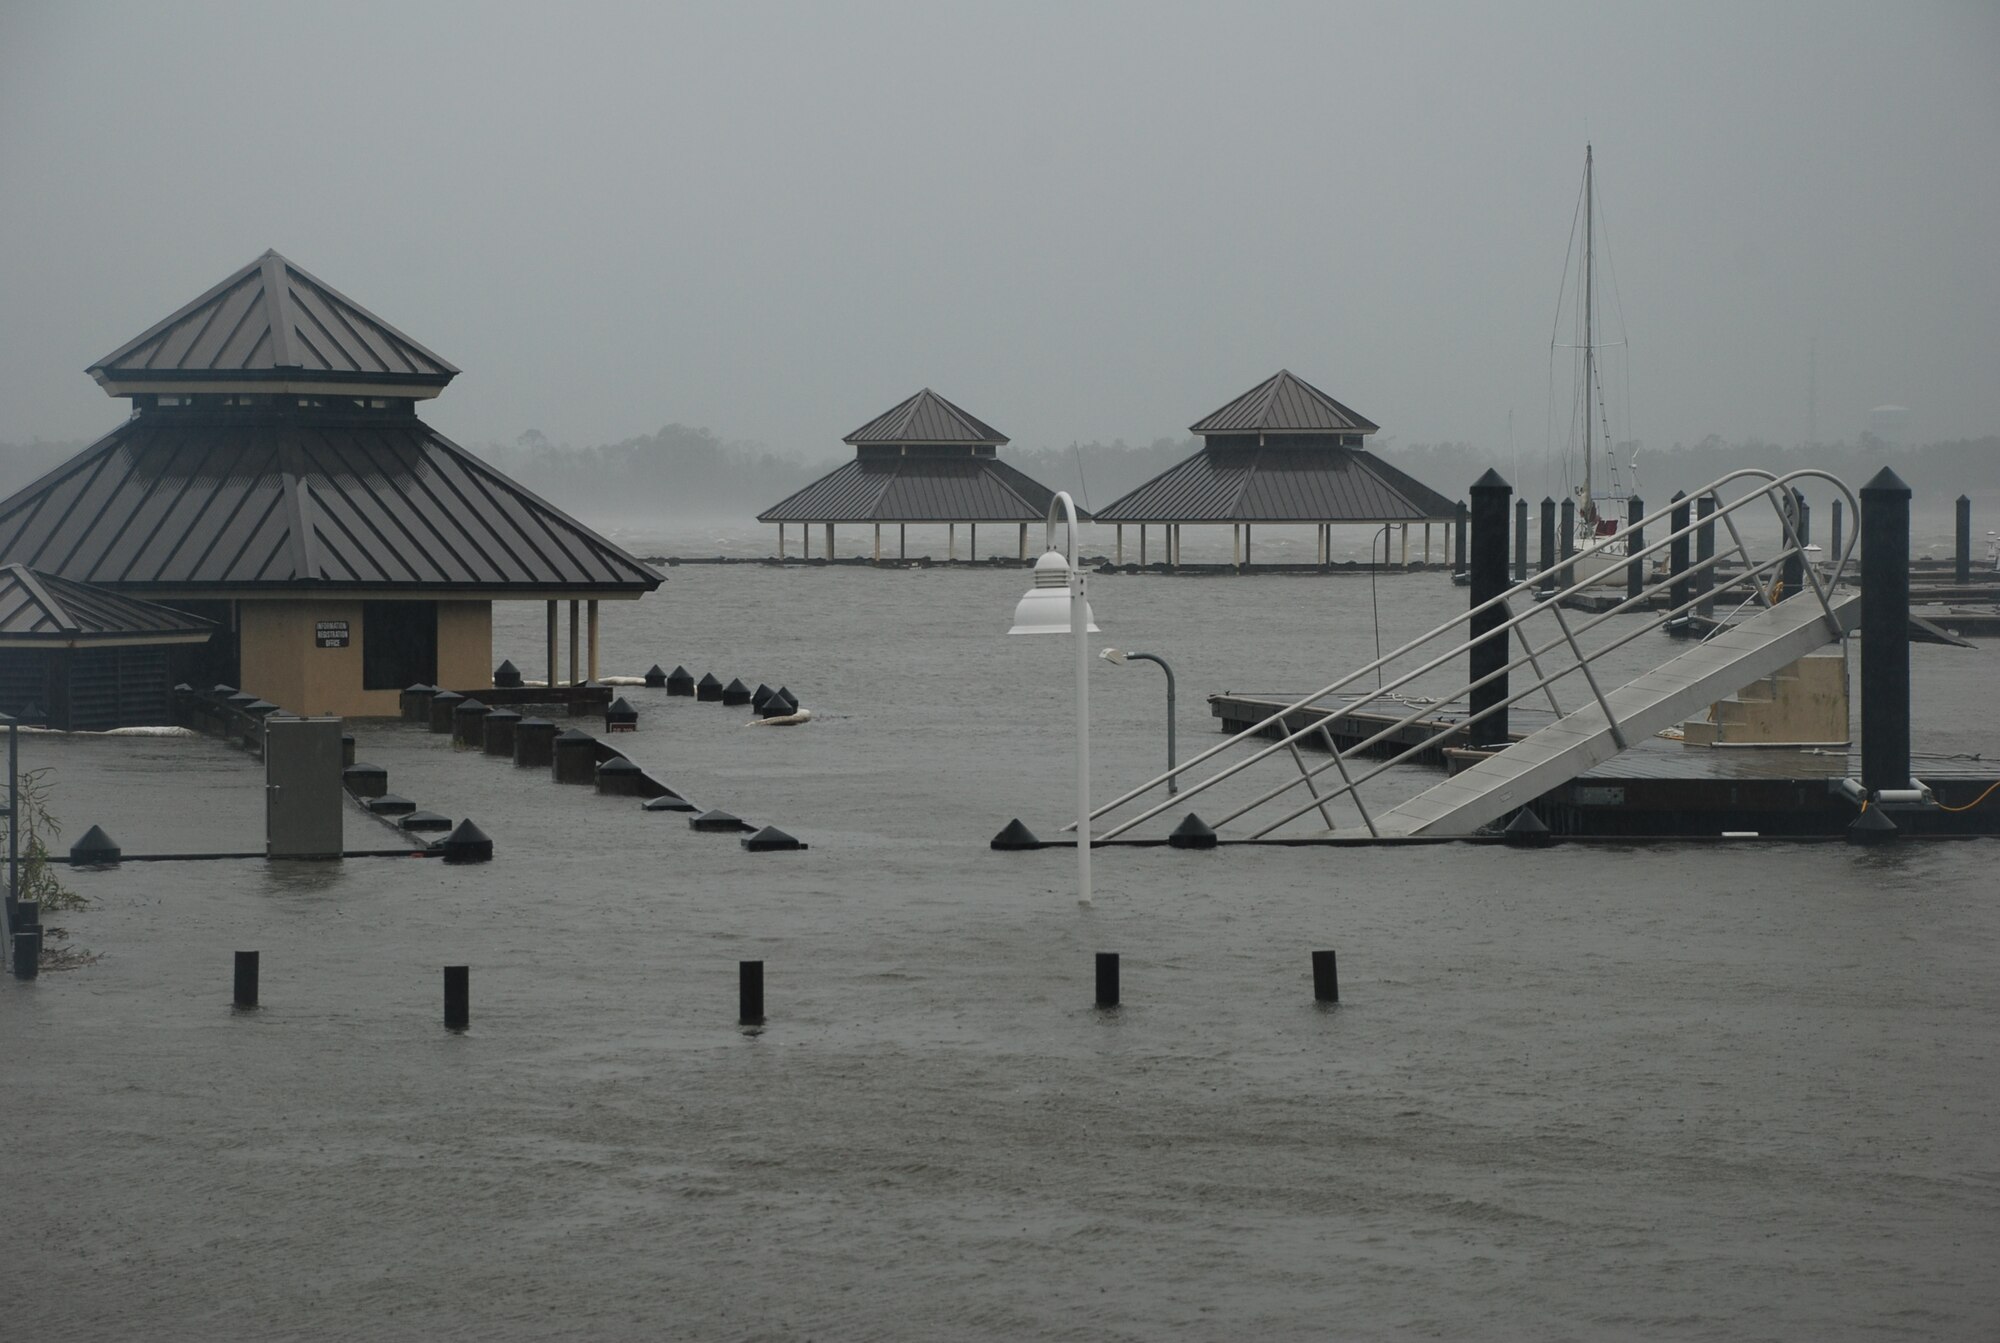 A storm surge in the Back Bay raises waters over the Keesler Marina’s docks. In an effort to ensure the safety of Keesler personnel and assets during Hurricane Isaac, the base was closed Aug. 28-29 and reopened Aug. 30 following minimal damage.  (U.S. Air Force photo by Staff Sgt. Kimberly Rae Moore)